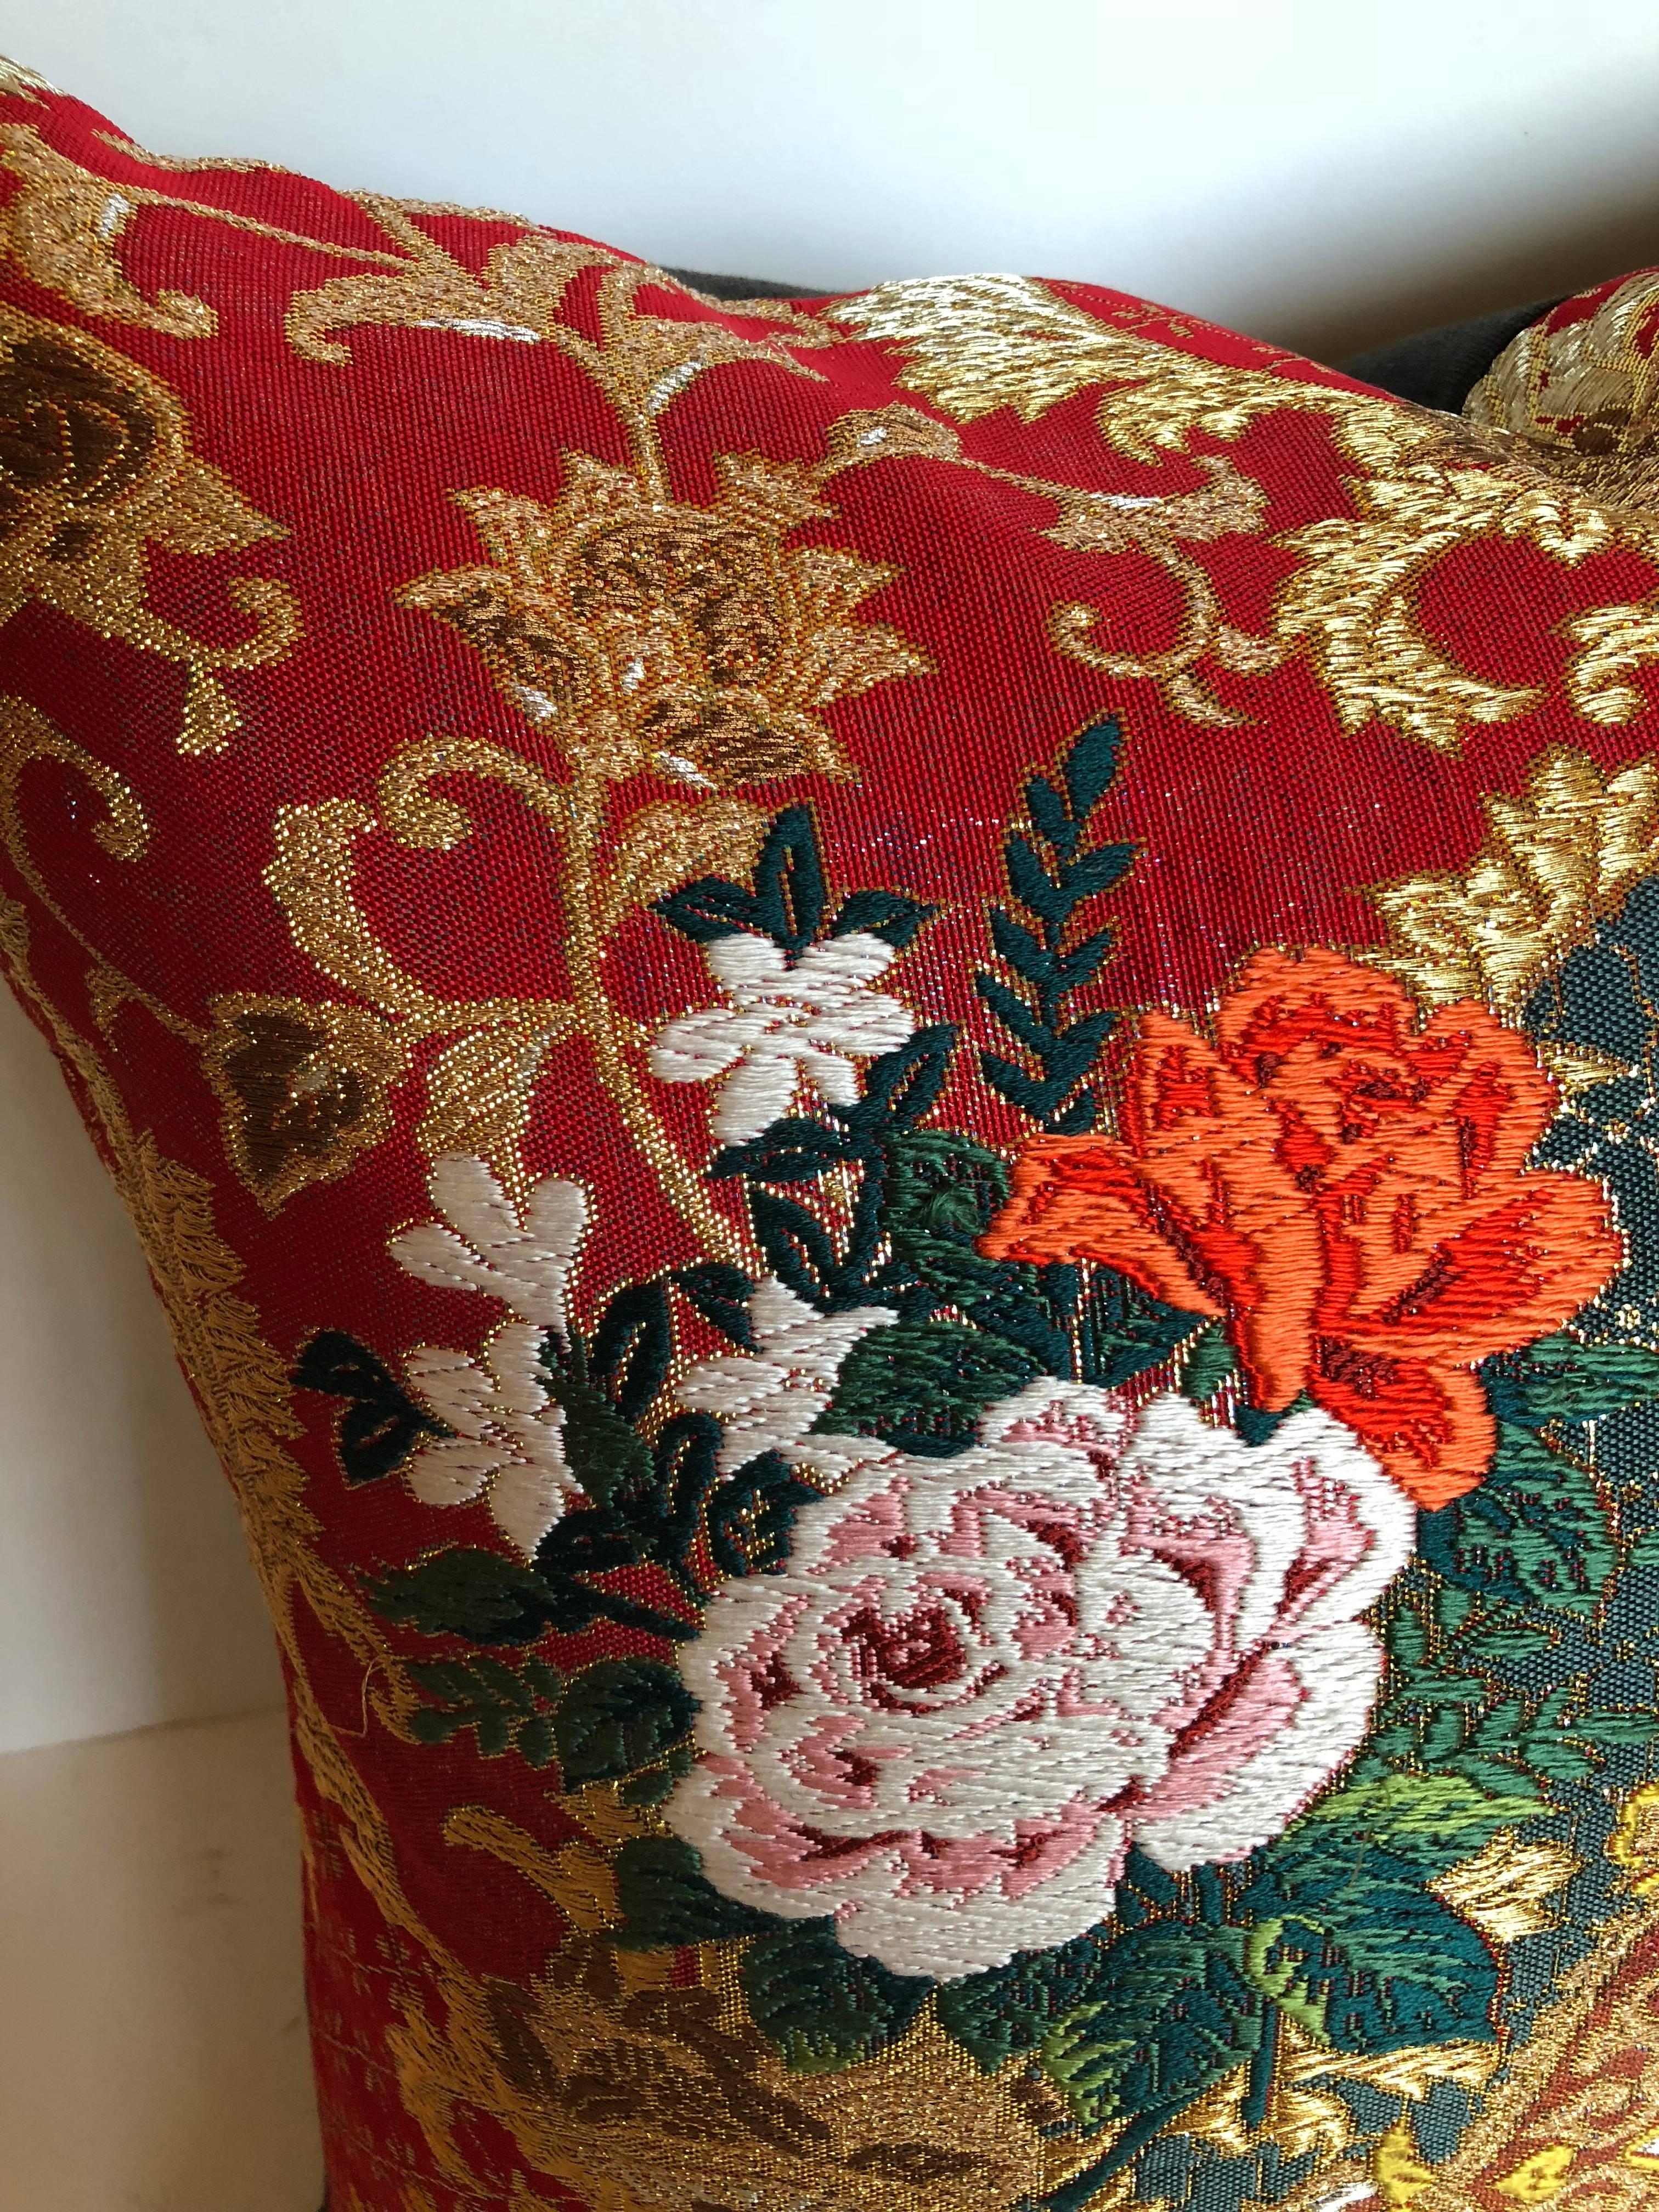 Custom pillow cut from a vintage silk Japanese Uchikake, the traditional wedding kimono. Japanese silk textiles were woven in 14